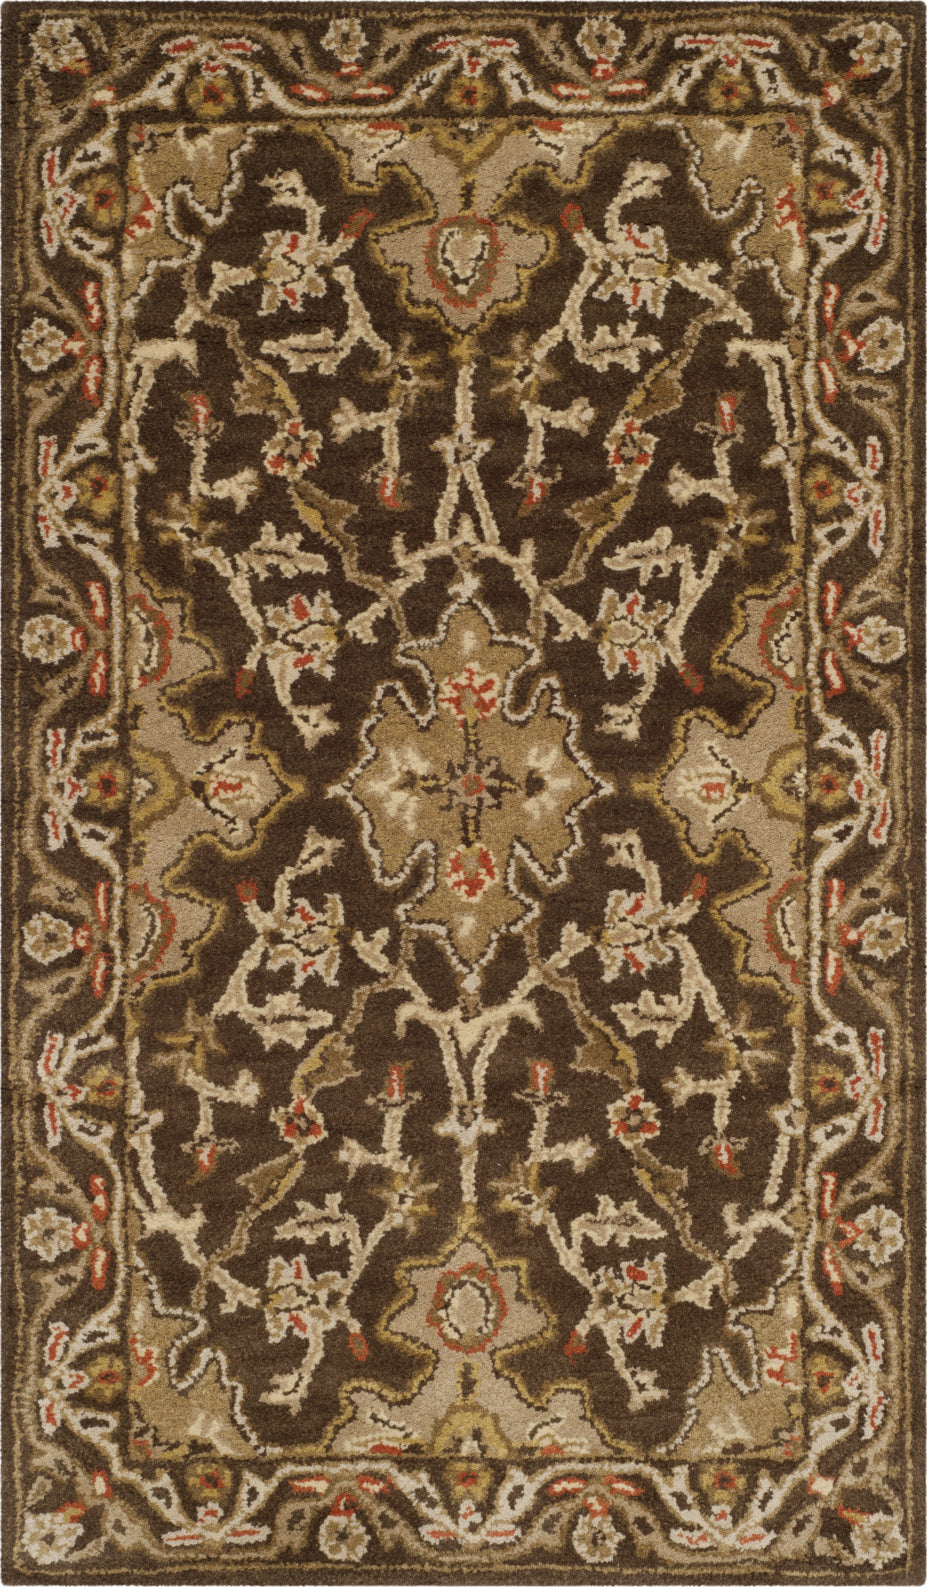 Safavieh Classic Cl931 Brown/Brown Area Rug main image